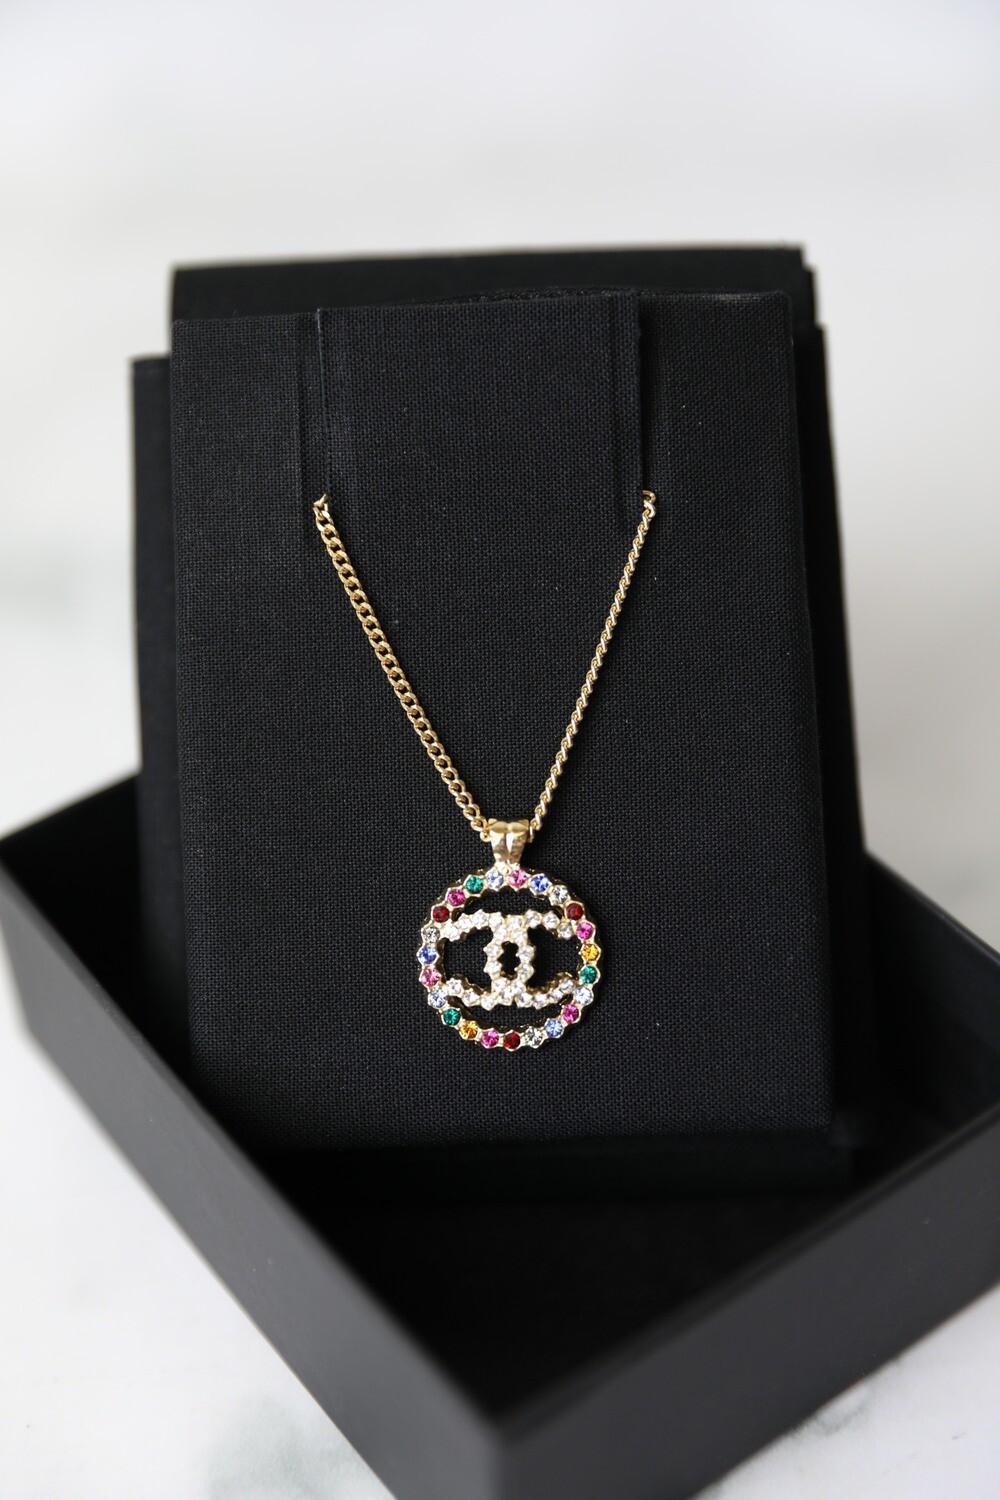 Sold at Auction: Chanel Crystal CC Emoji Necklace B